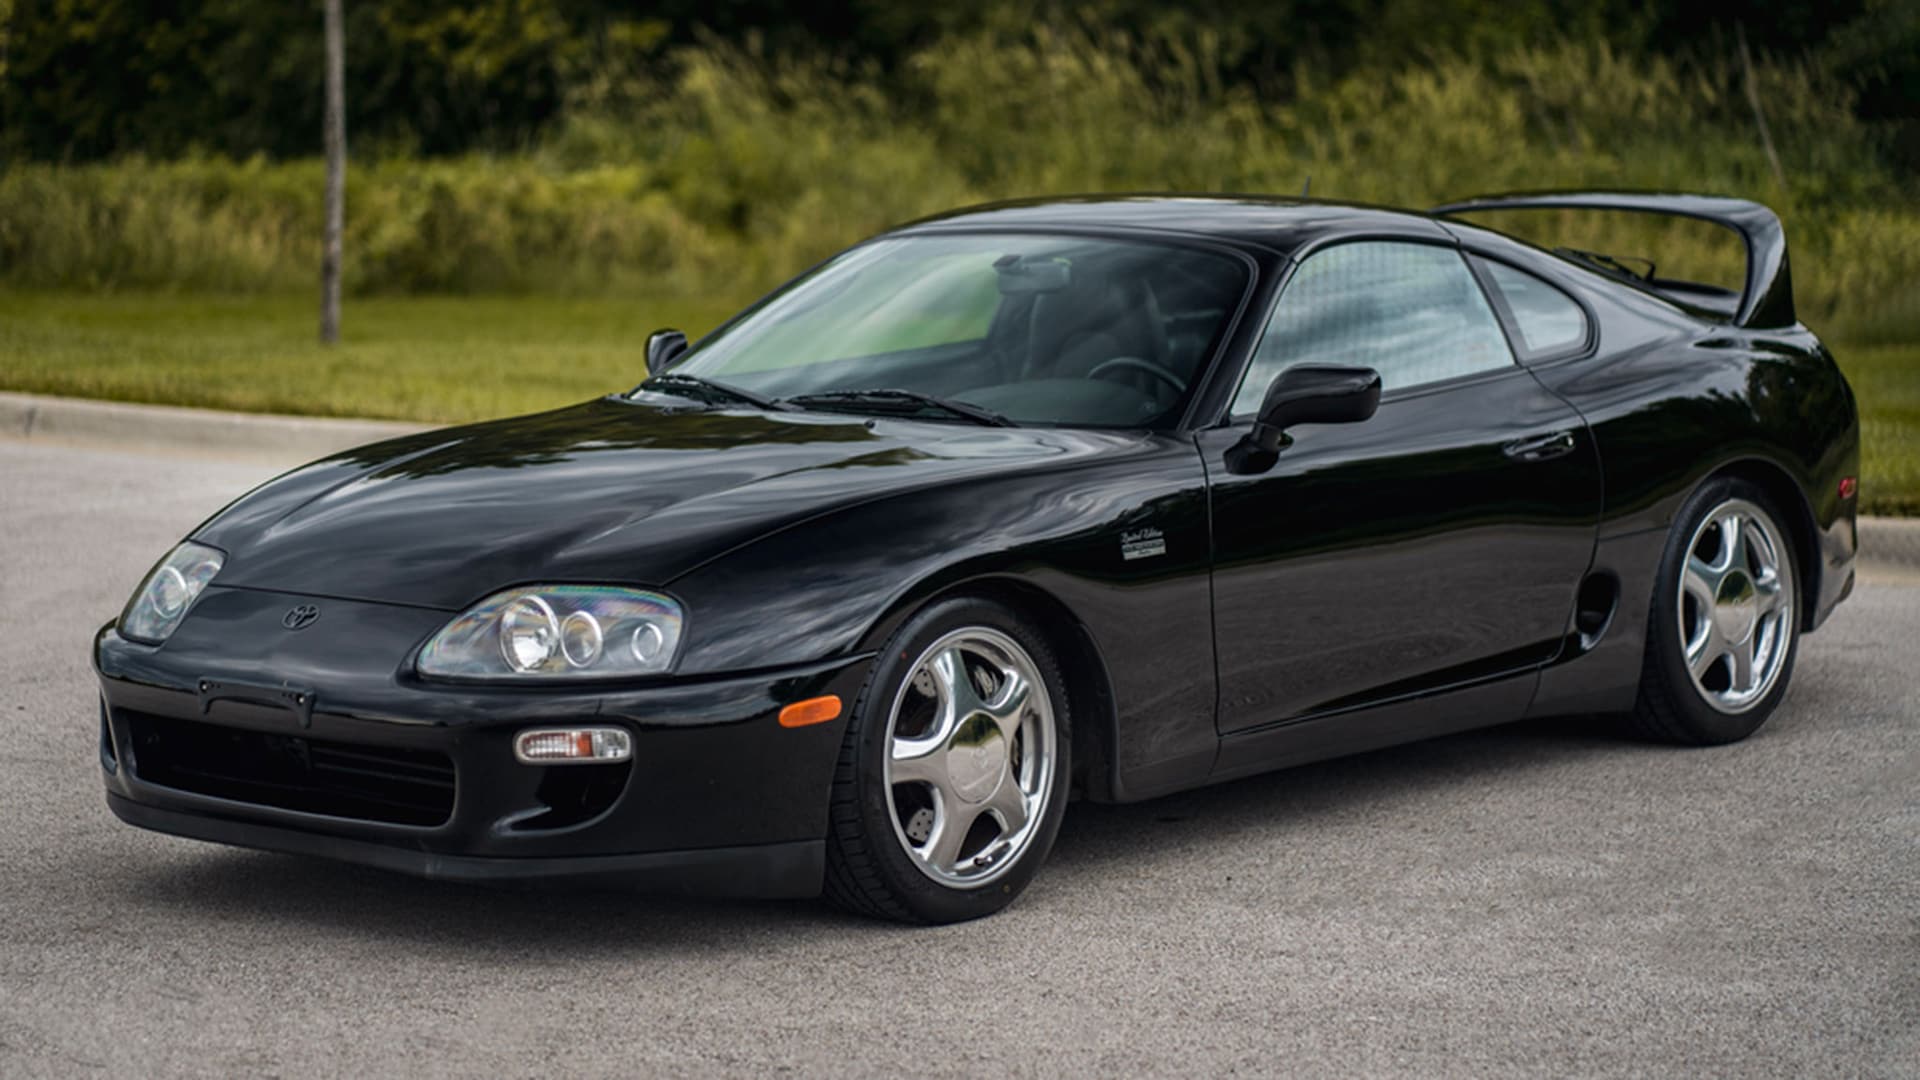 1997 Toyota Supra Turbo Heads Fast and Furious to Auction Block